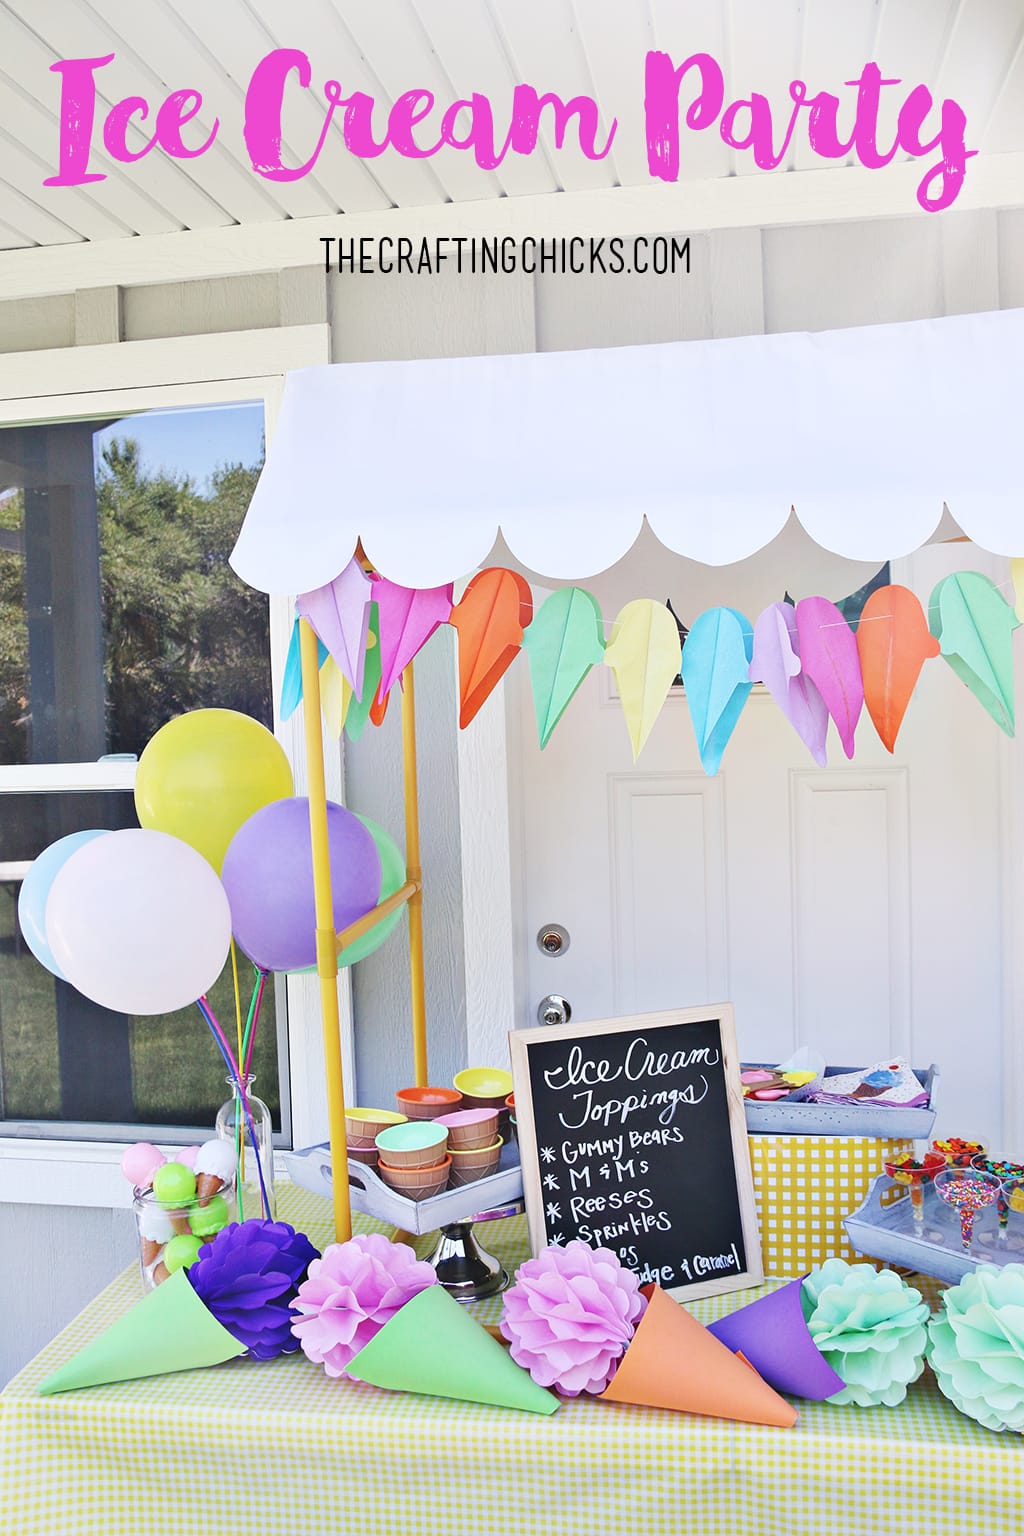 Ice Cream Party - The Crafting Chicks